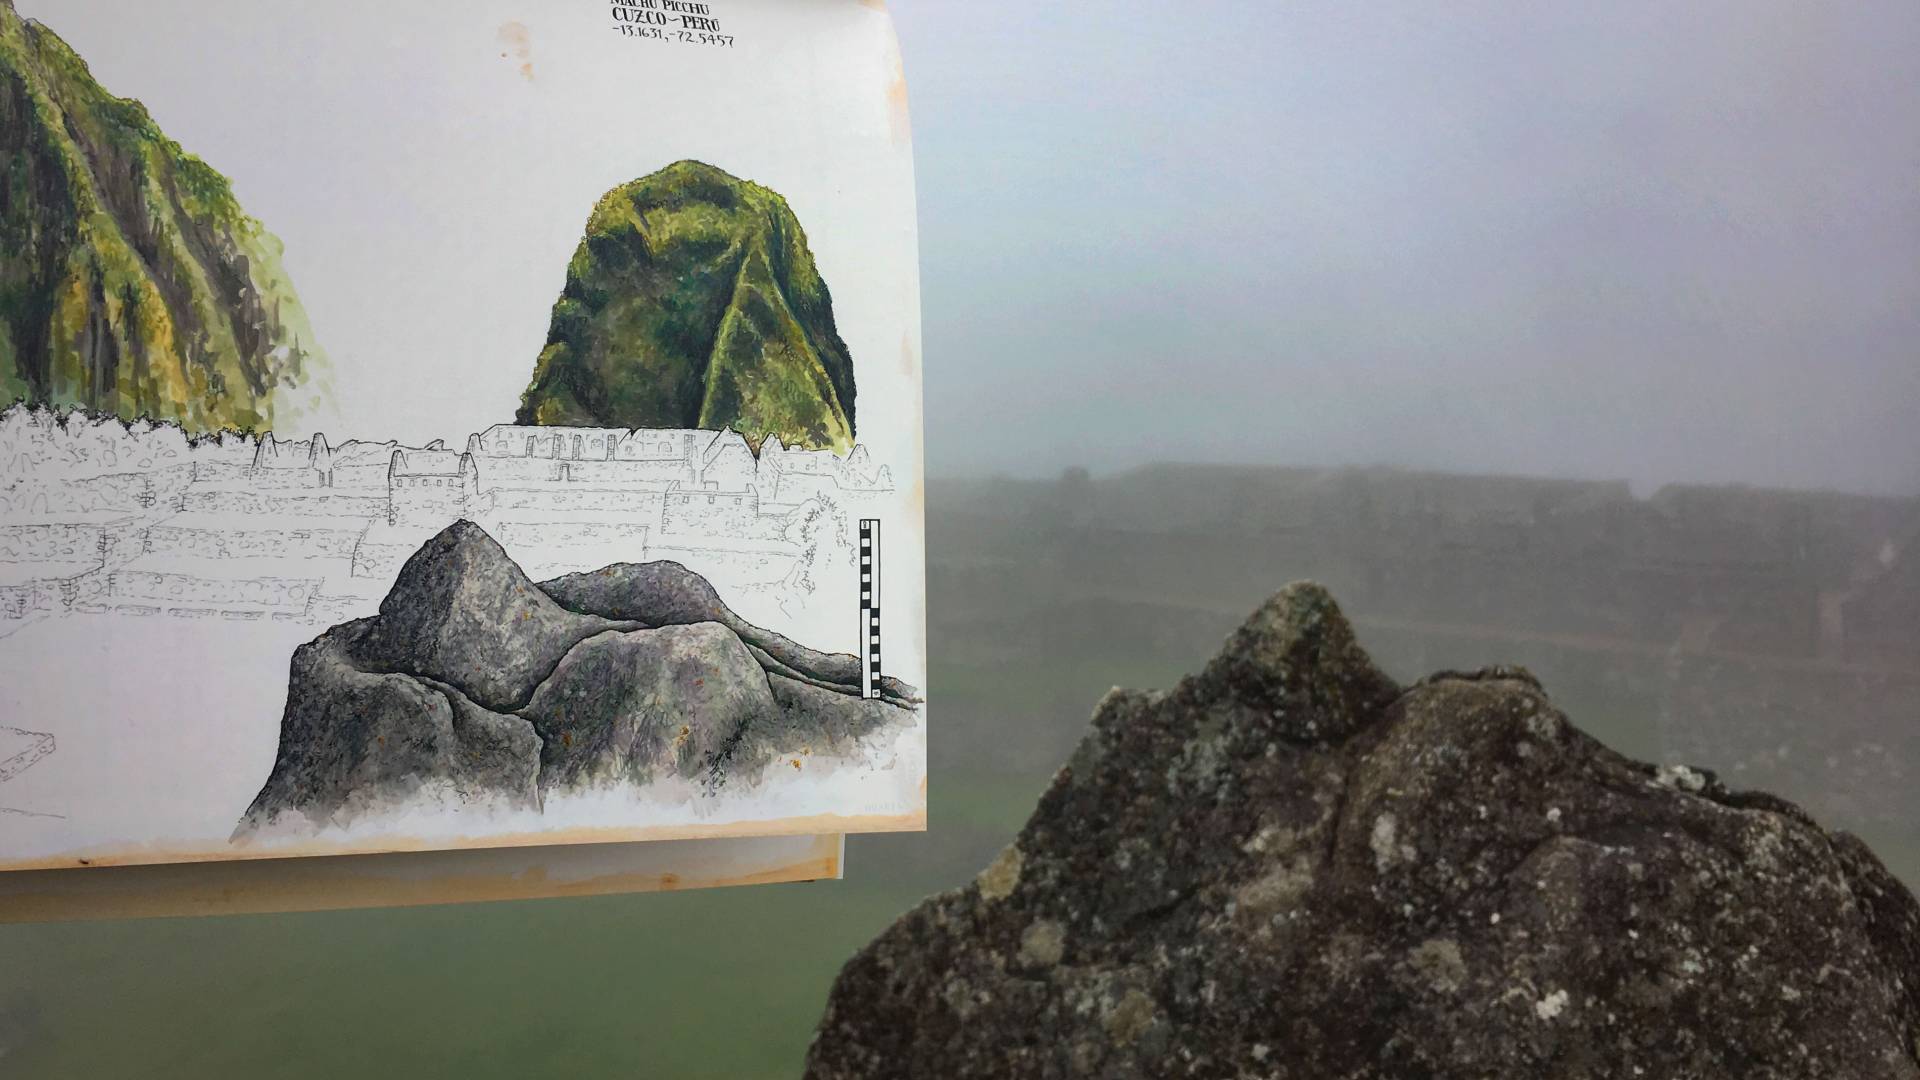 Page from book side-by-side original landscape in background